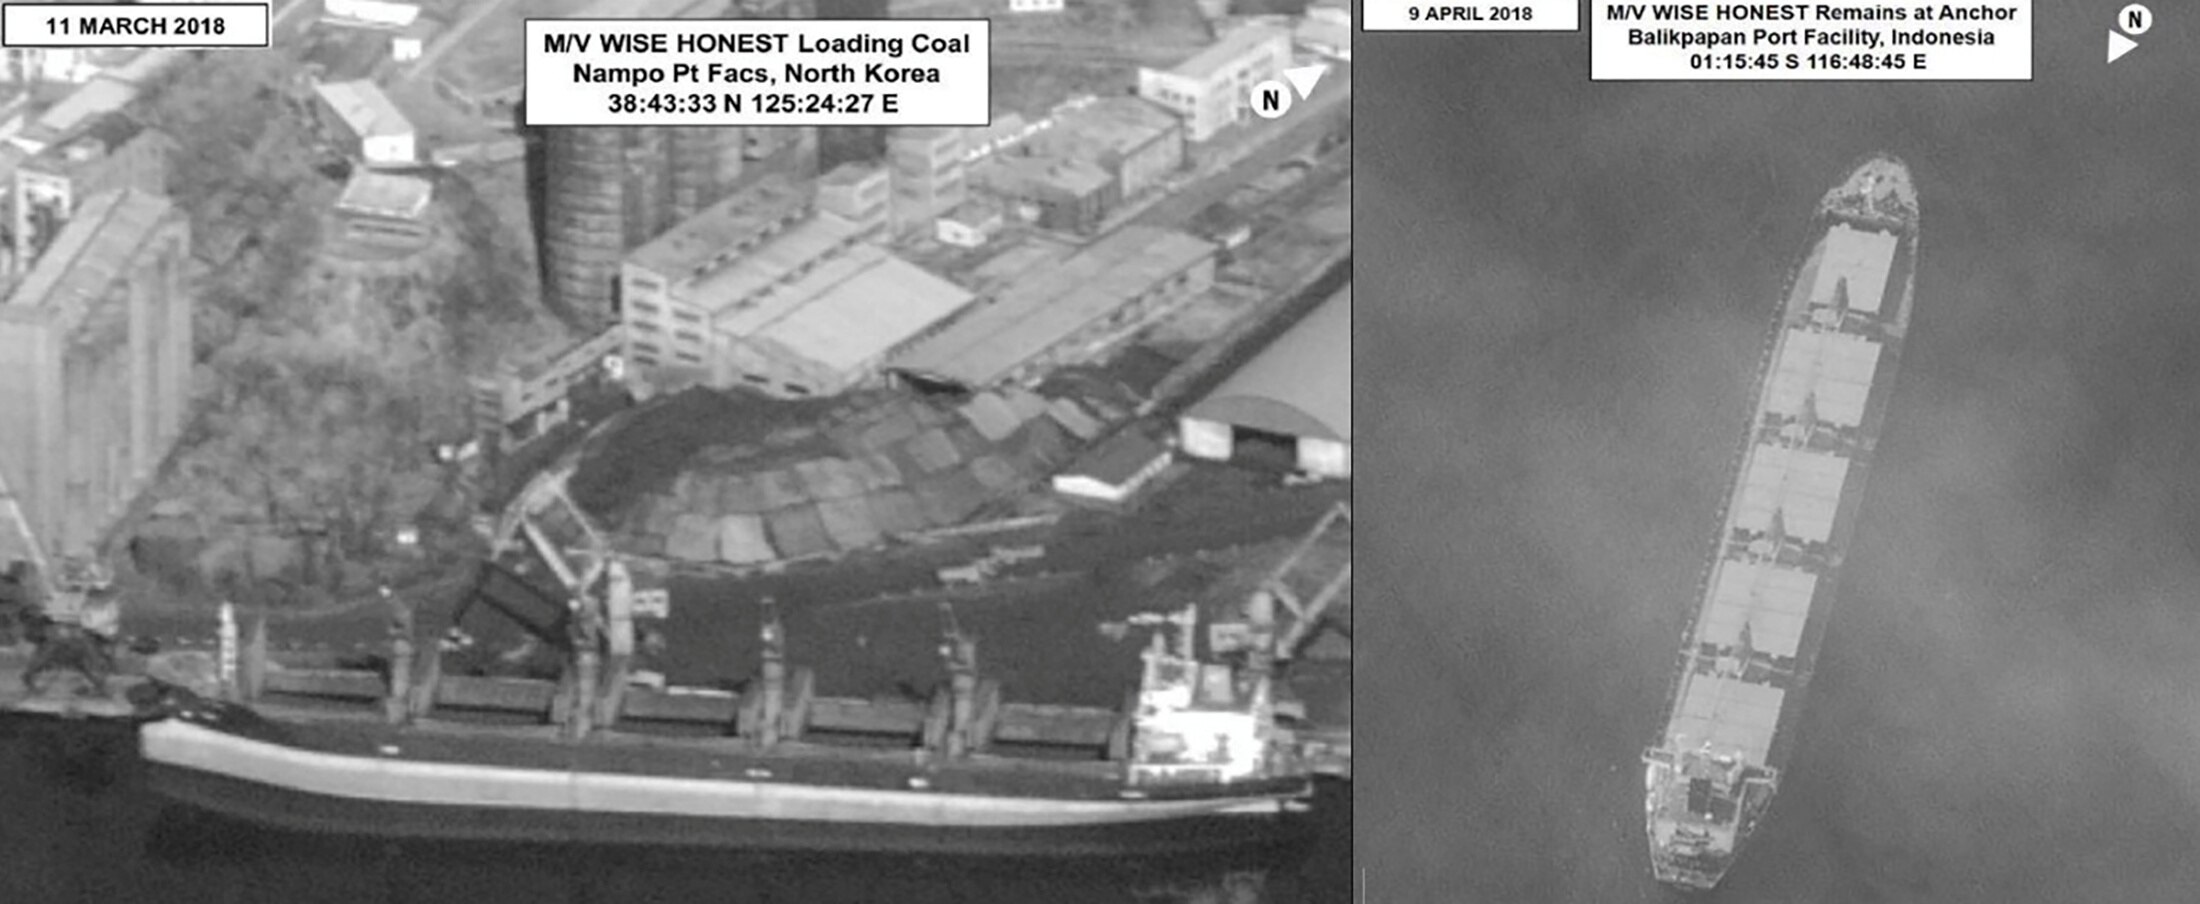 A black and white aerial images of a boat docked at a port and then in the sea